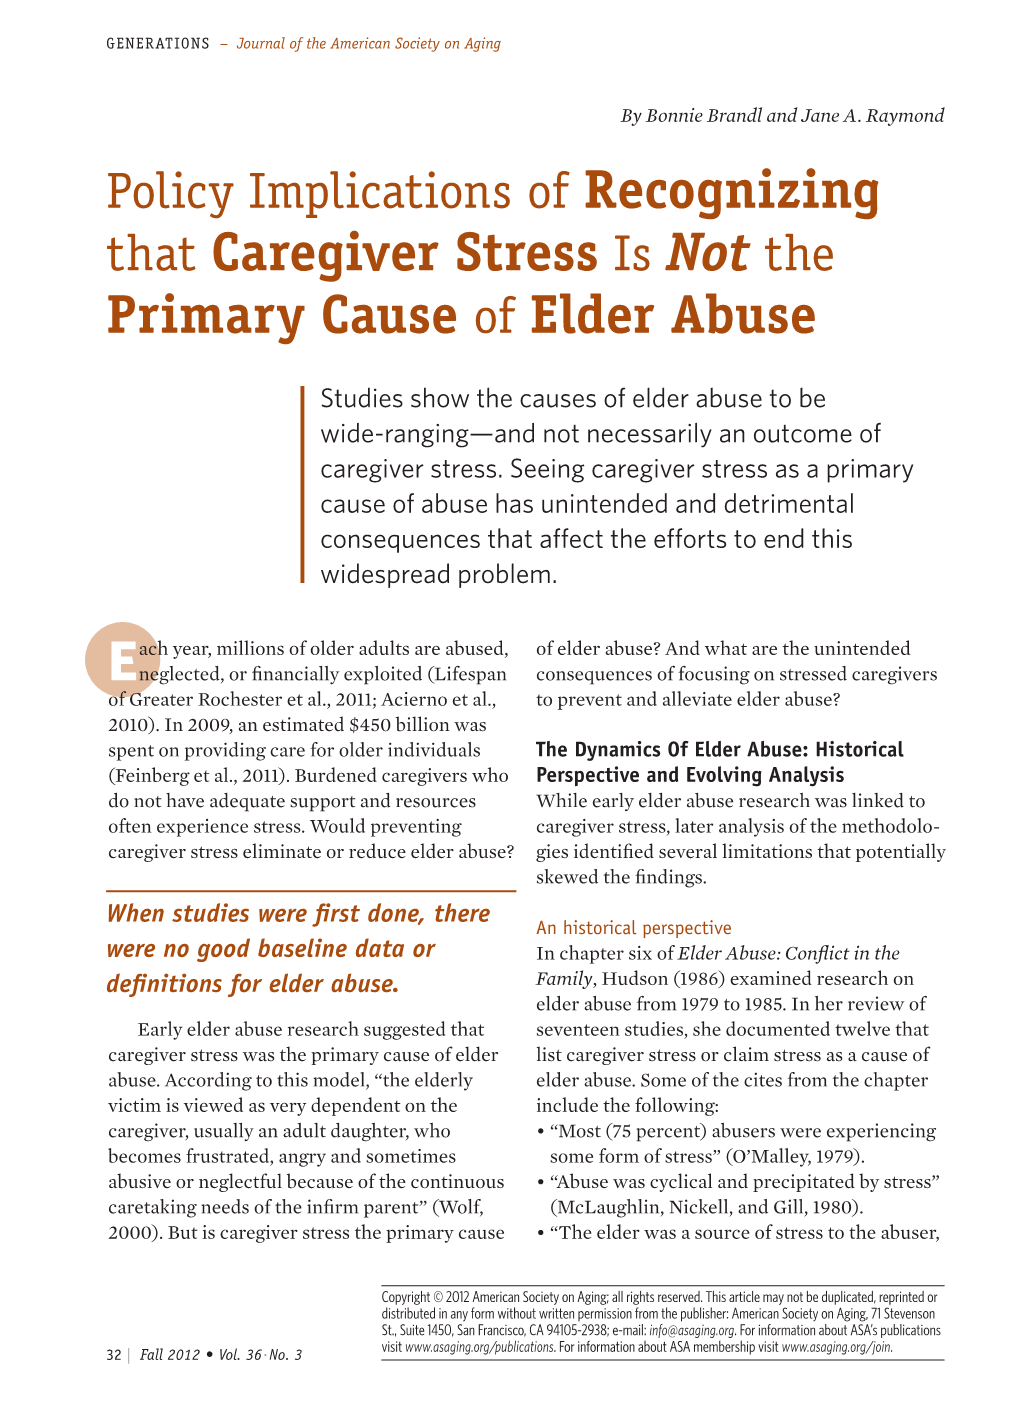 That Caregiver Stress Is Not the Primary Cause of Elder Abuse